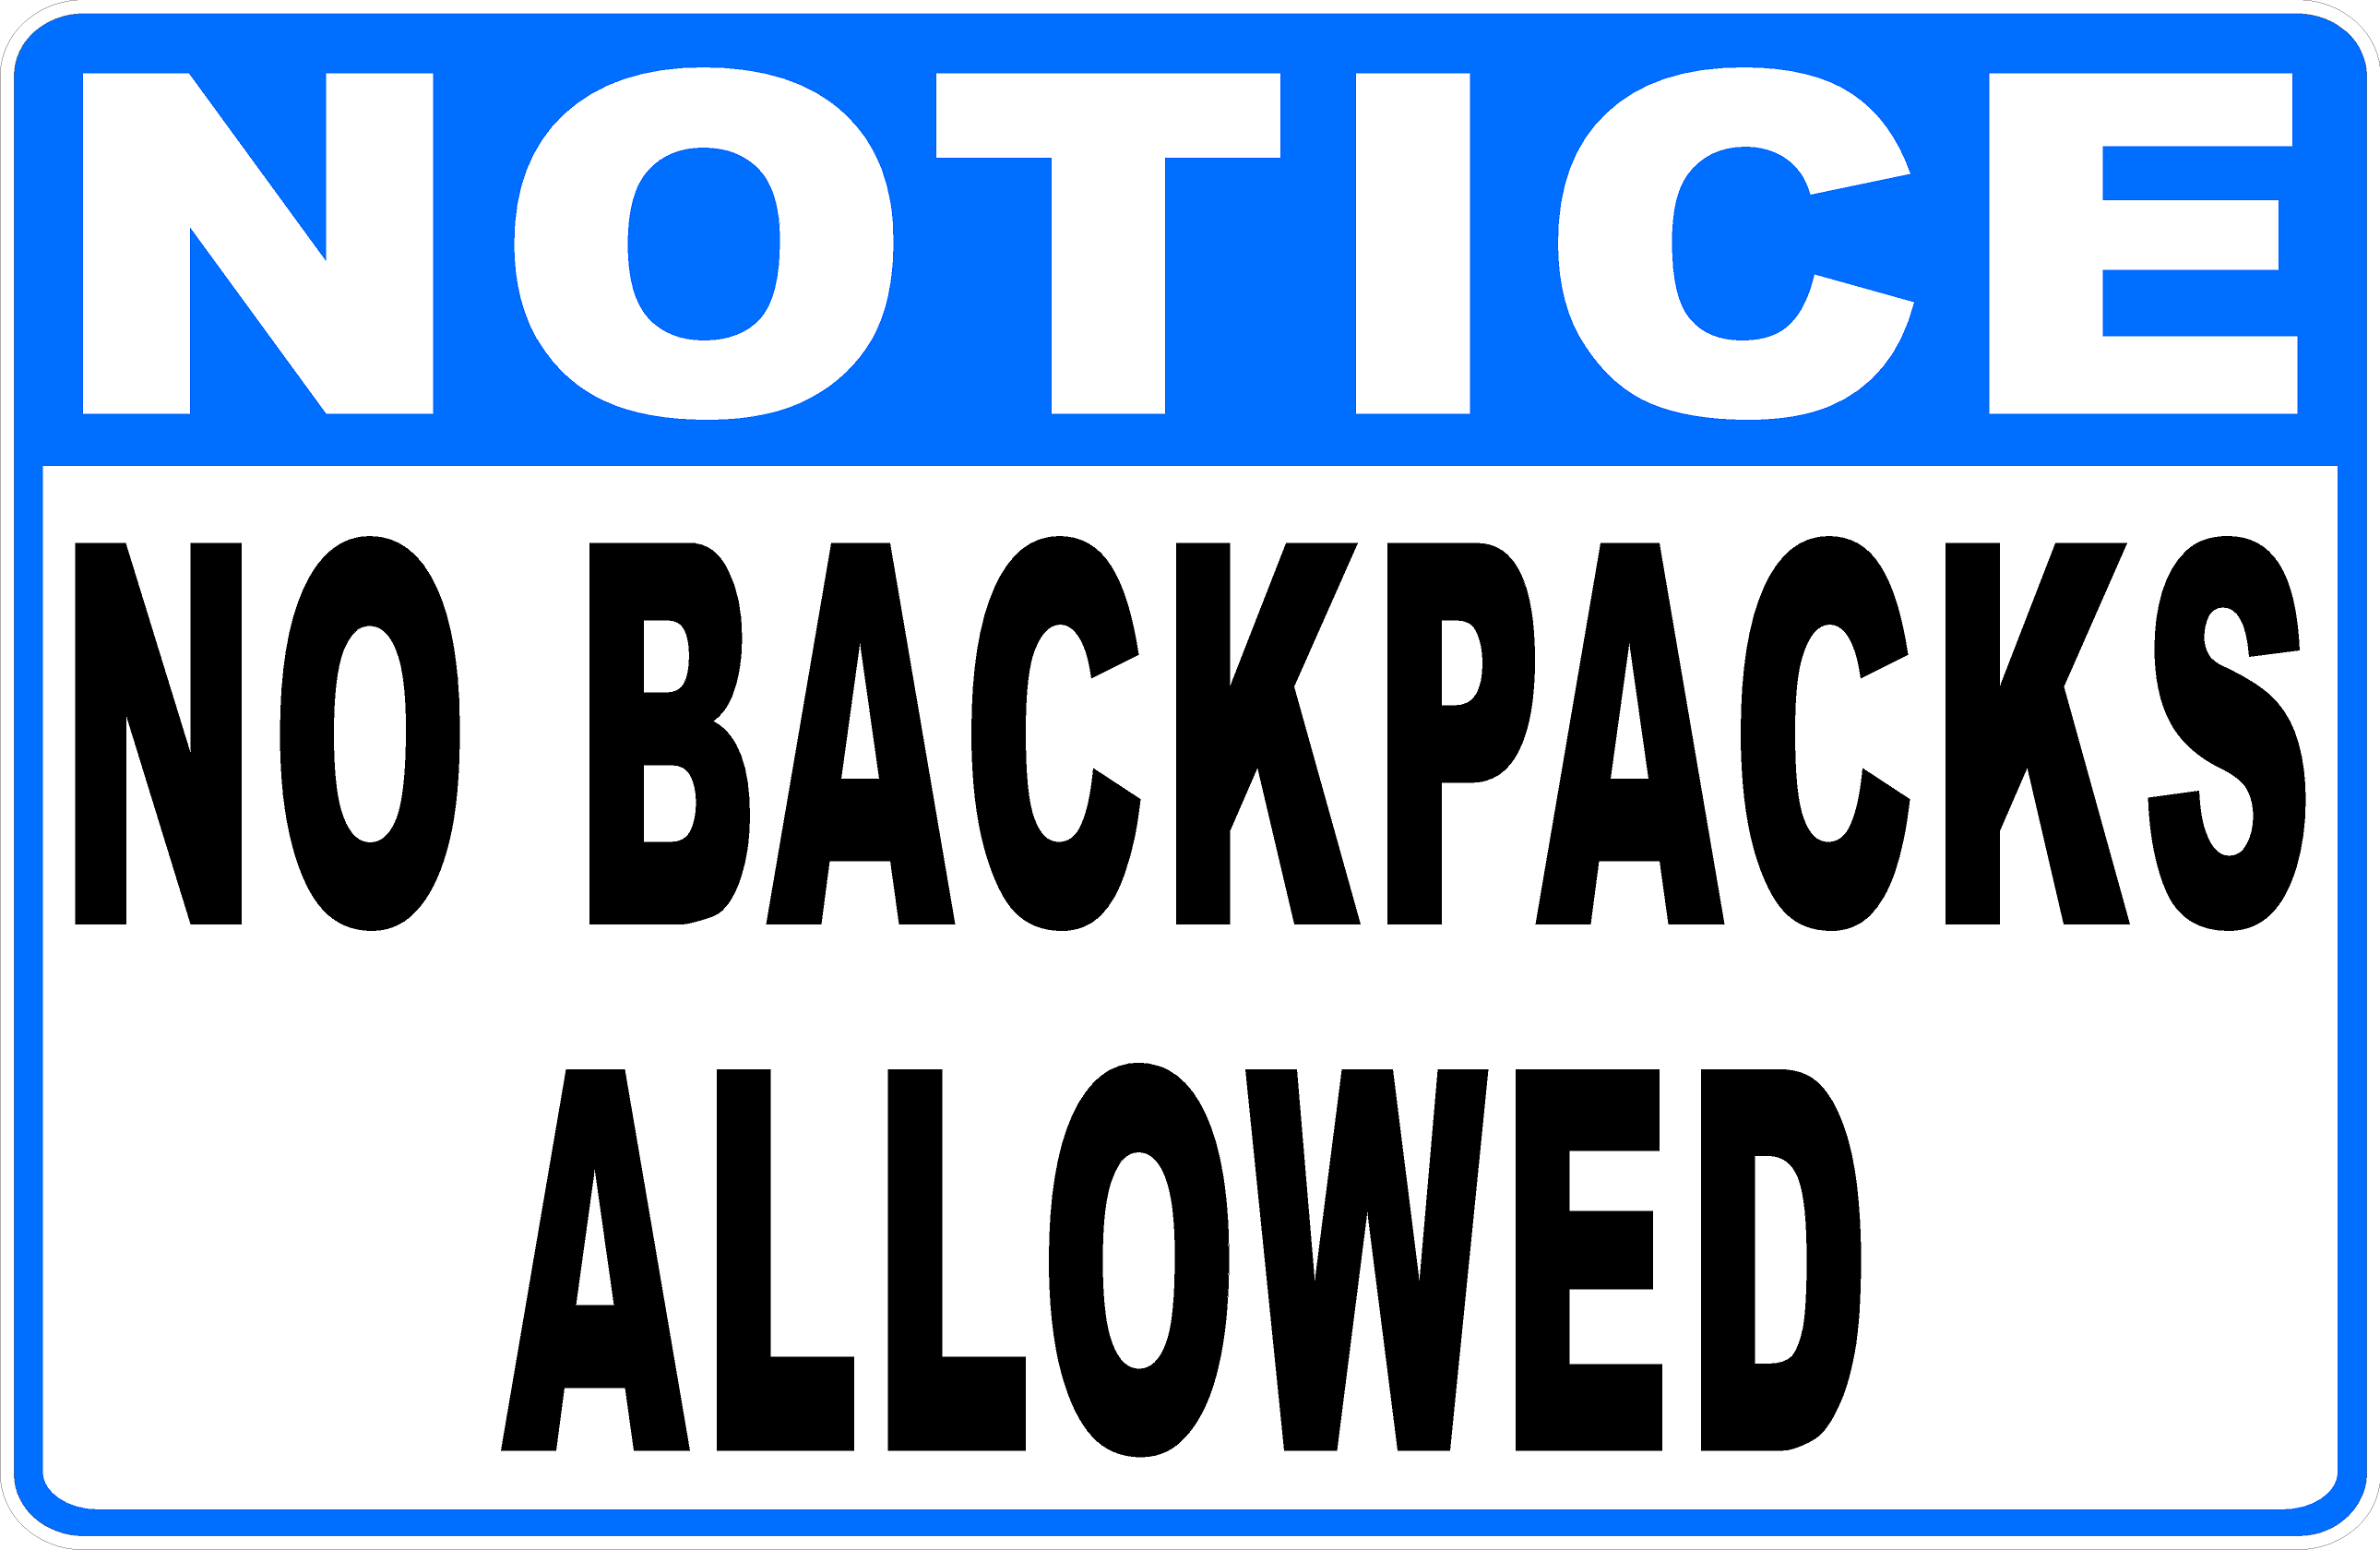 No Cell Phones Bags Purses Backpacks Allowed in Court Sign, SKU: S2-1723